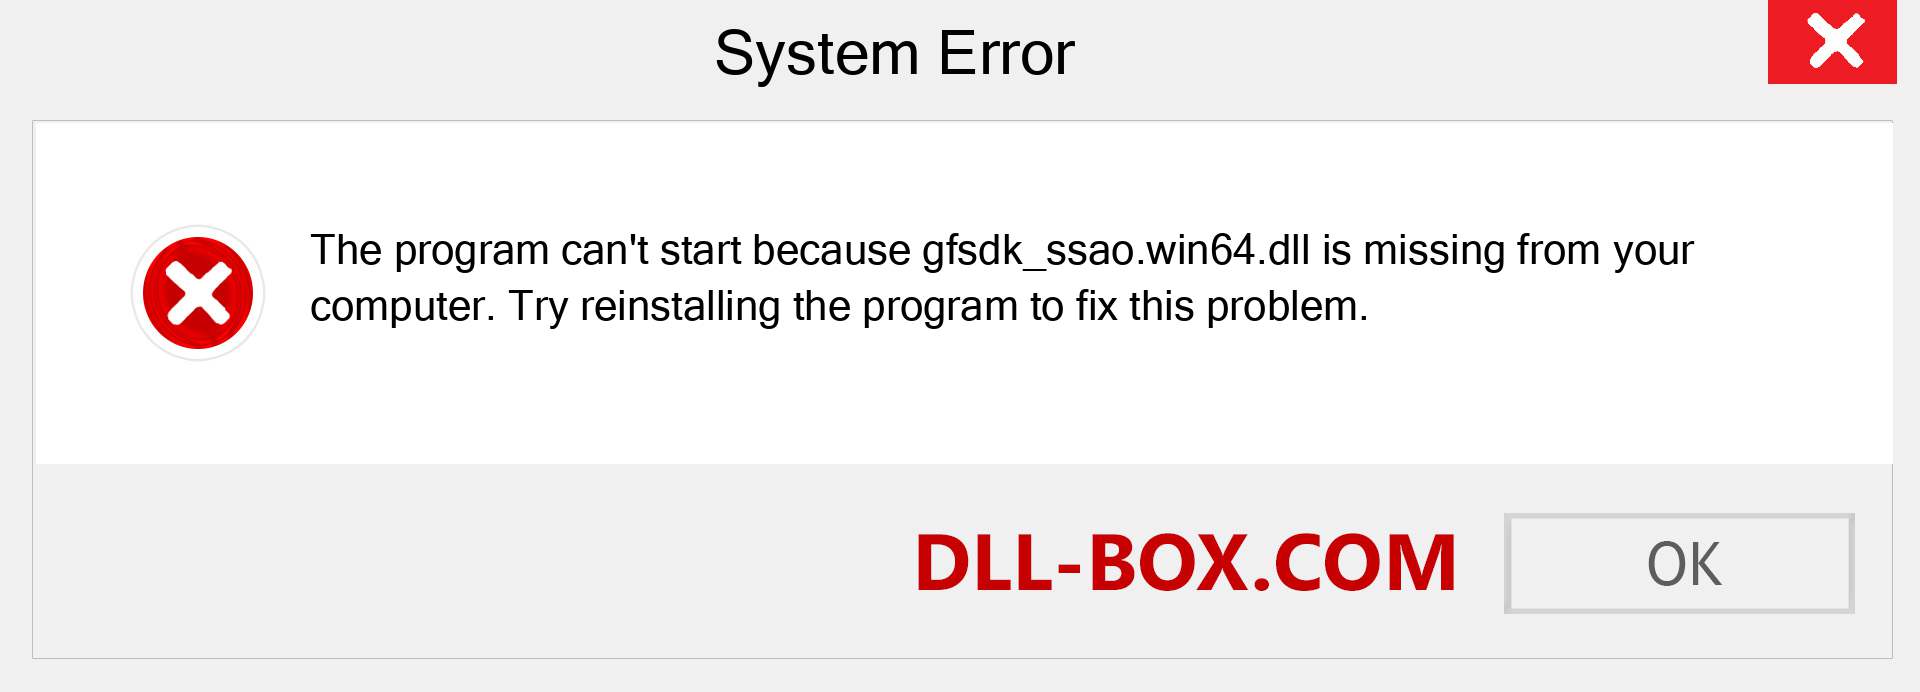  gfsdk_ssao.win64.dll file is missing?. Download for Windows 7, 8, 10 - Fix  gfsdk_ssao.win64 dll Missing Error on Windows, photos, images